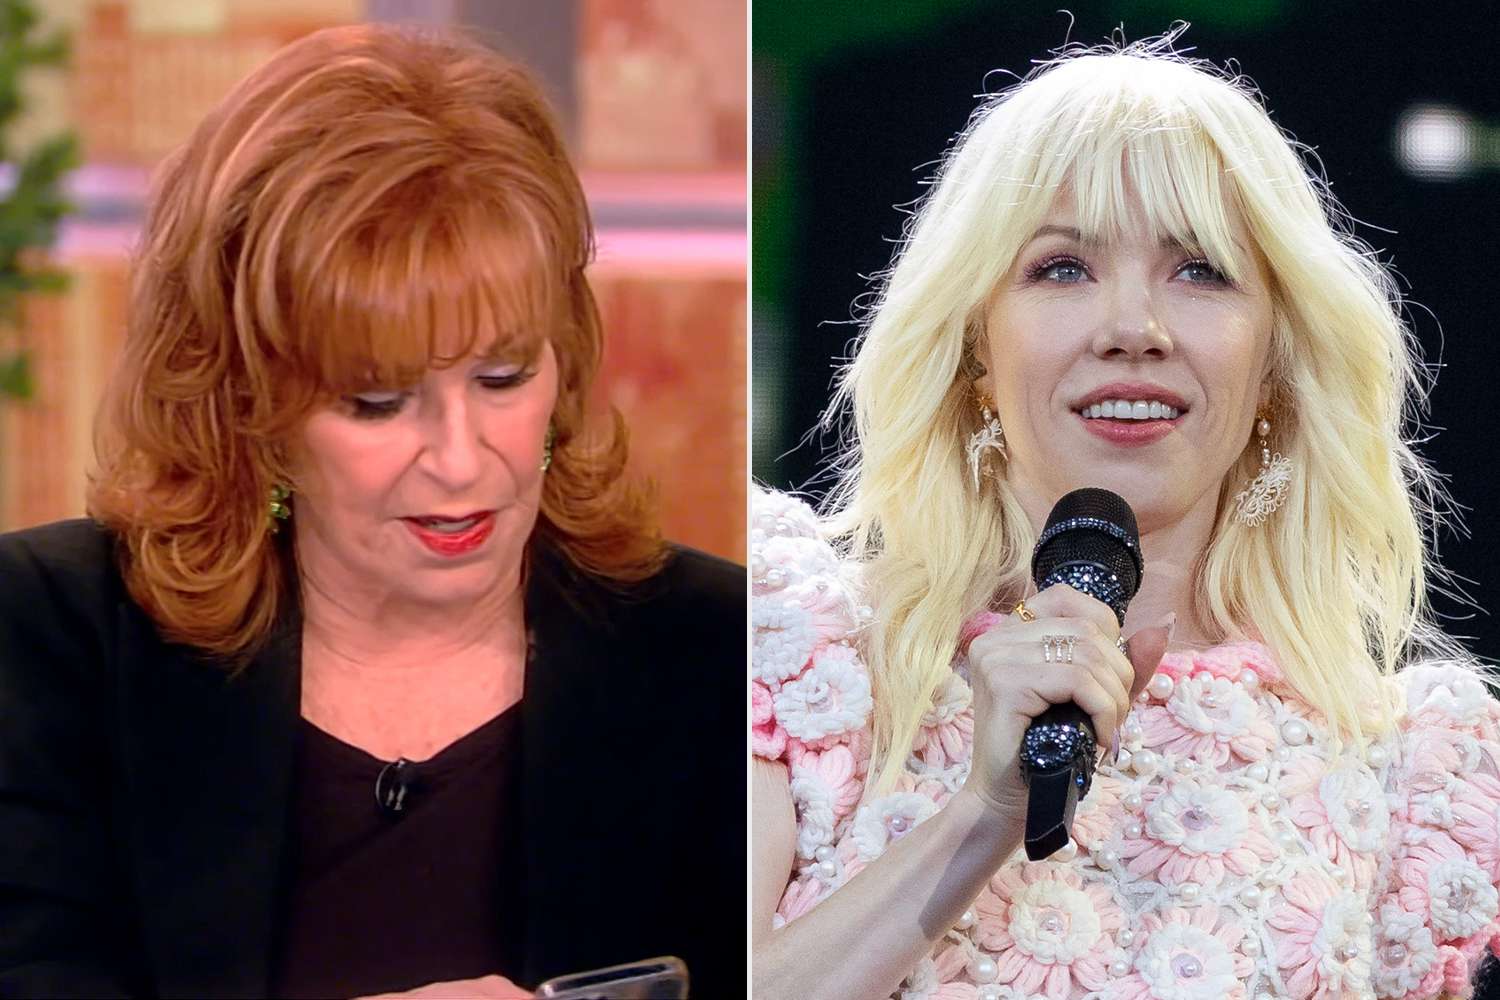 Joy Behar's phone interrupts 'The View' once again with Carly Rae Jepsen song